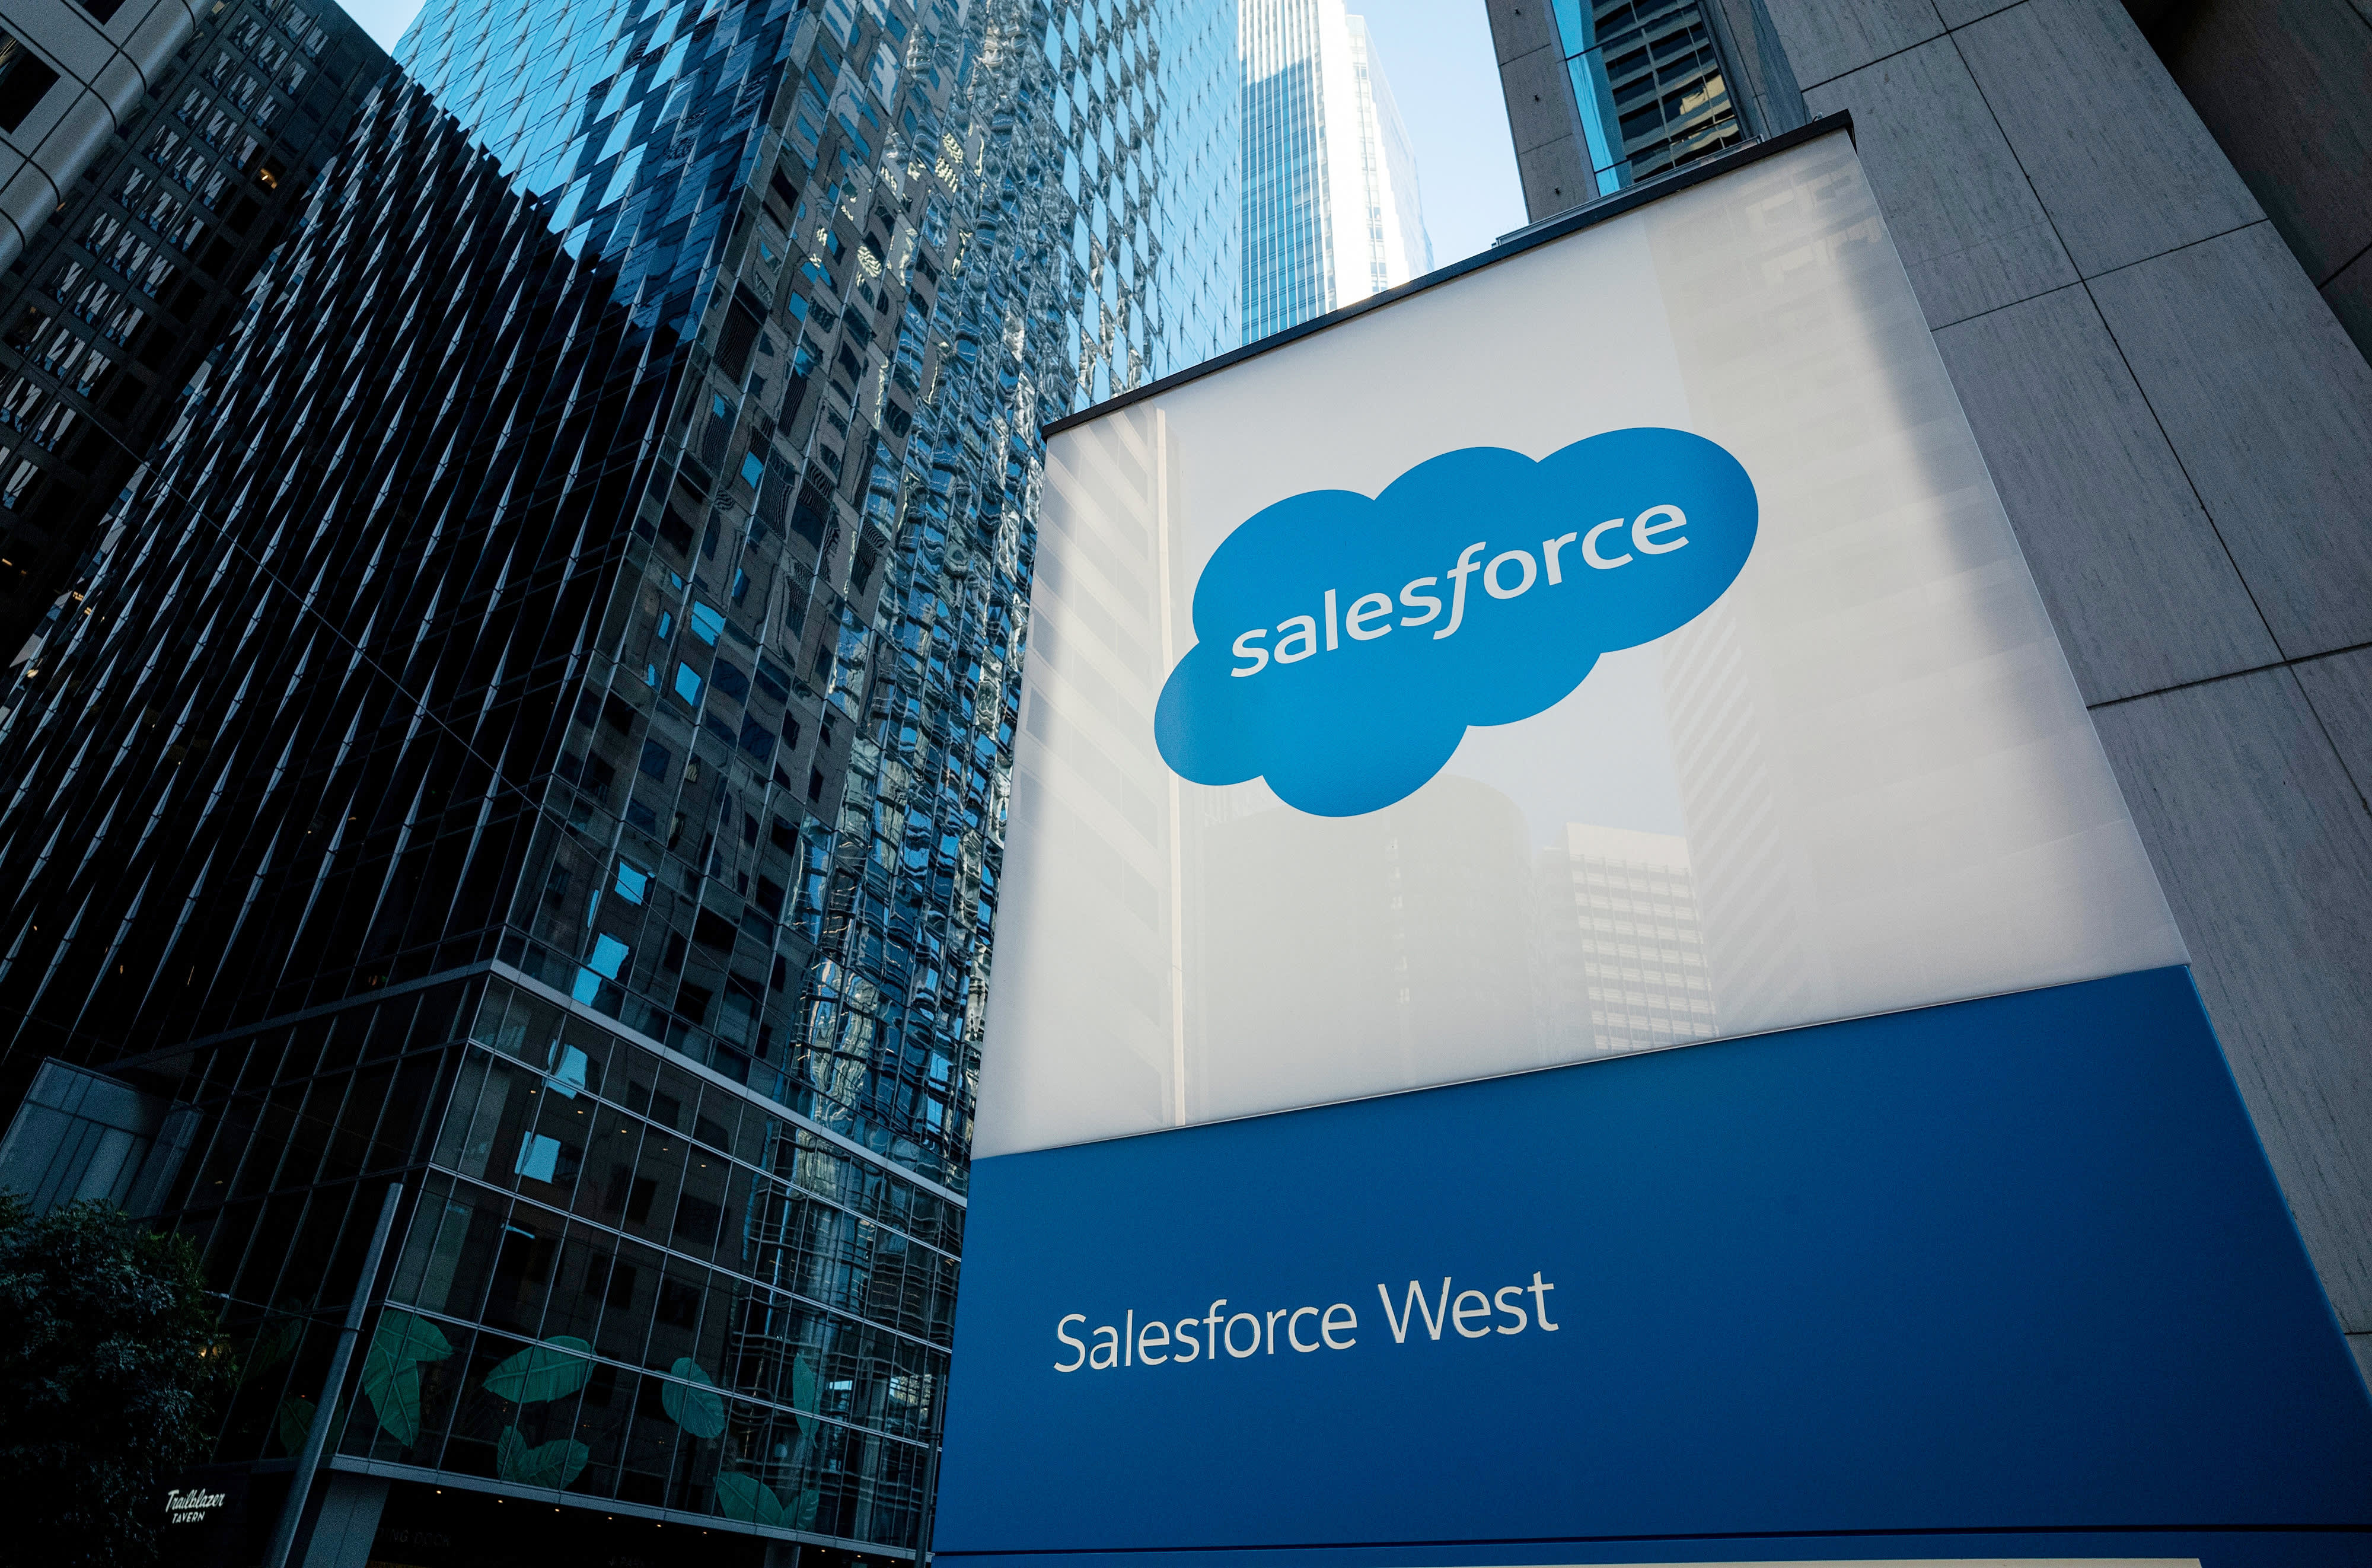 Salesforce's cost-cutting plan is a much-needed step in an economic downturn